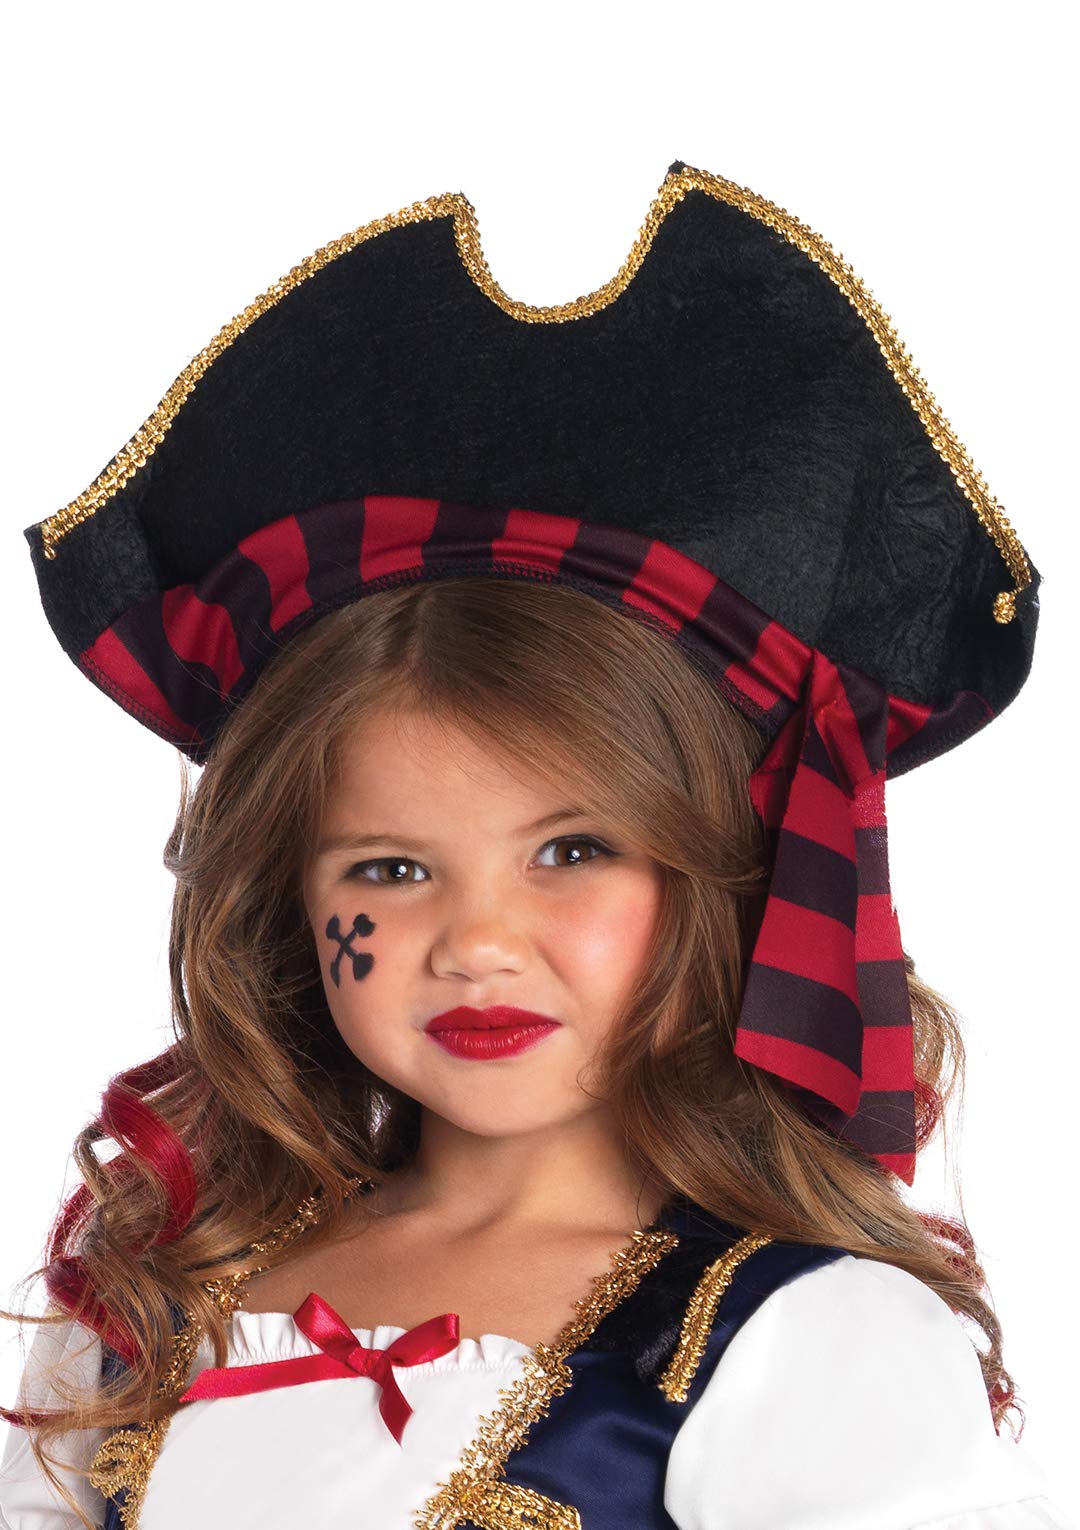 Leg Avenue Enchanted Costumes by Leg Avenue Girl's 2 Pc Caribbean Pirate Costume with Dress and Hat, Multicolor, X-Small (Age: 3-4)